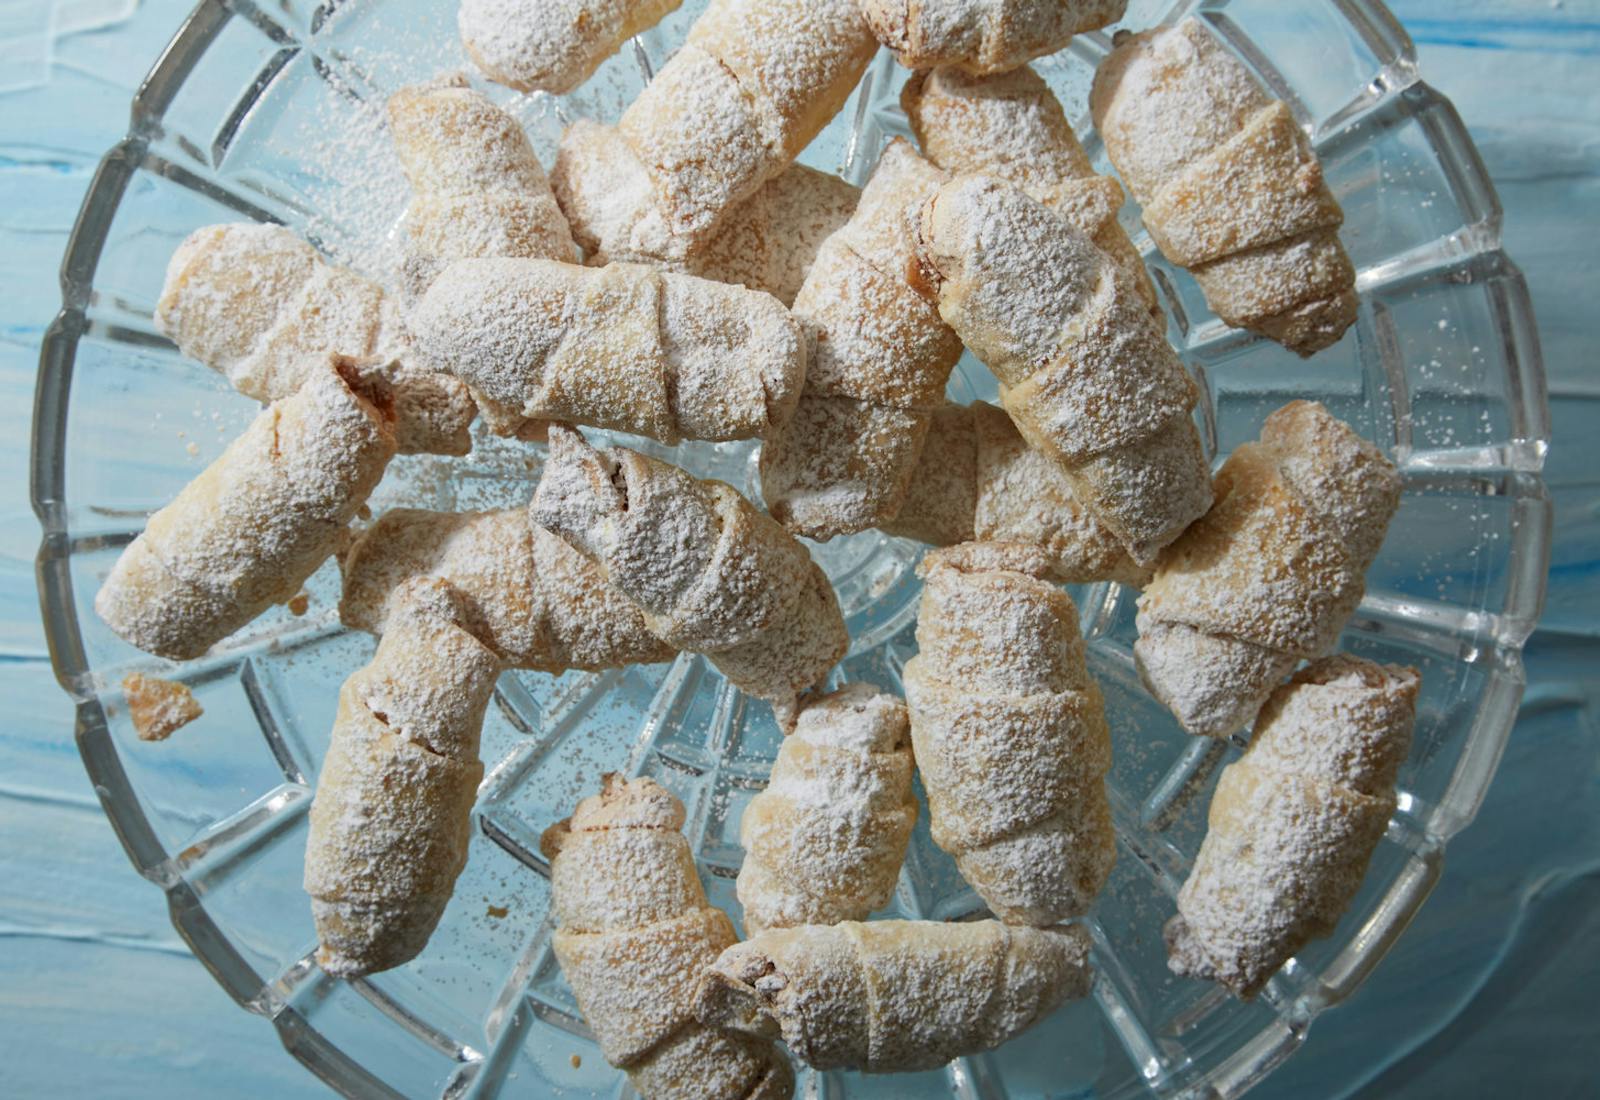 Meringue rugelach covered in powdered sugar on glass dish atop blue surface.